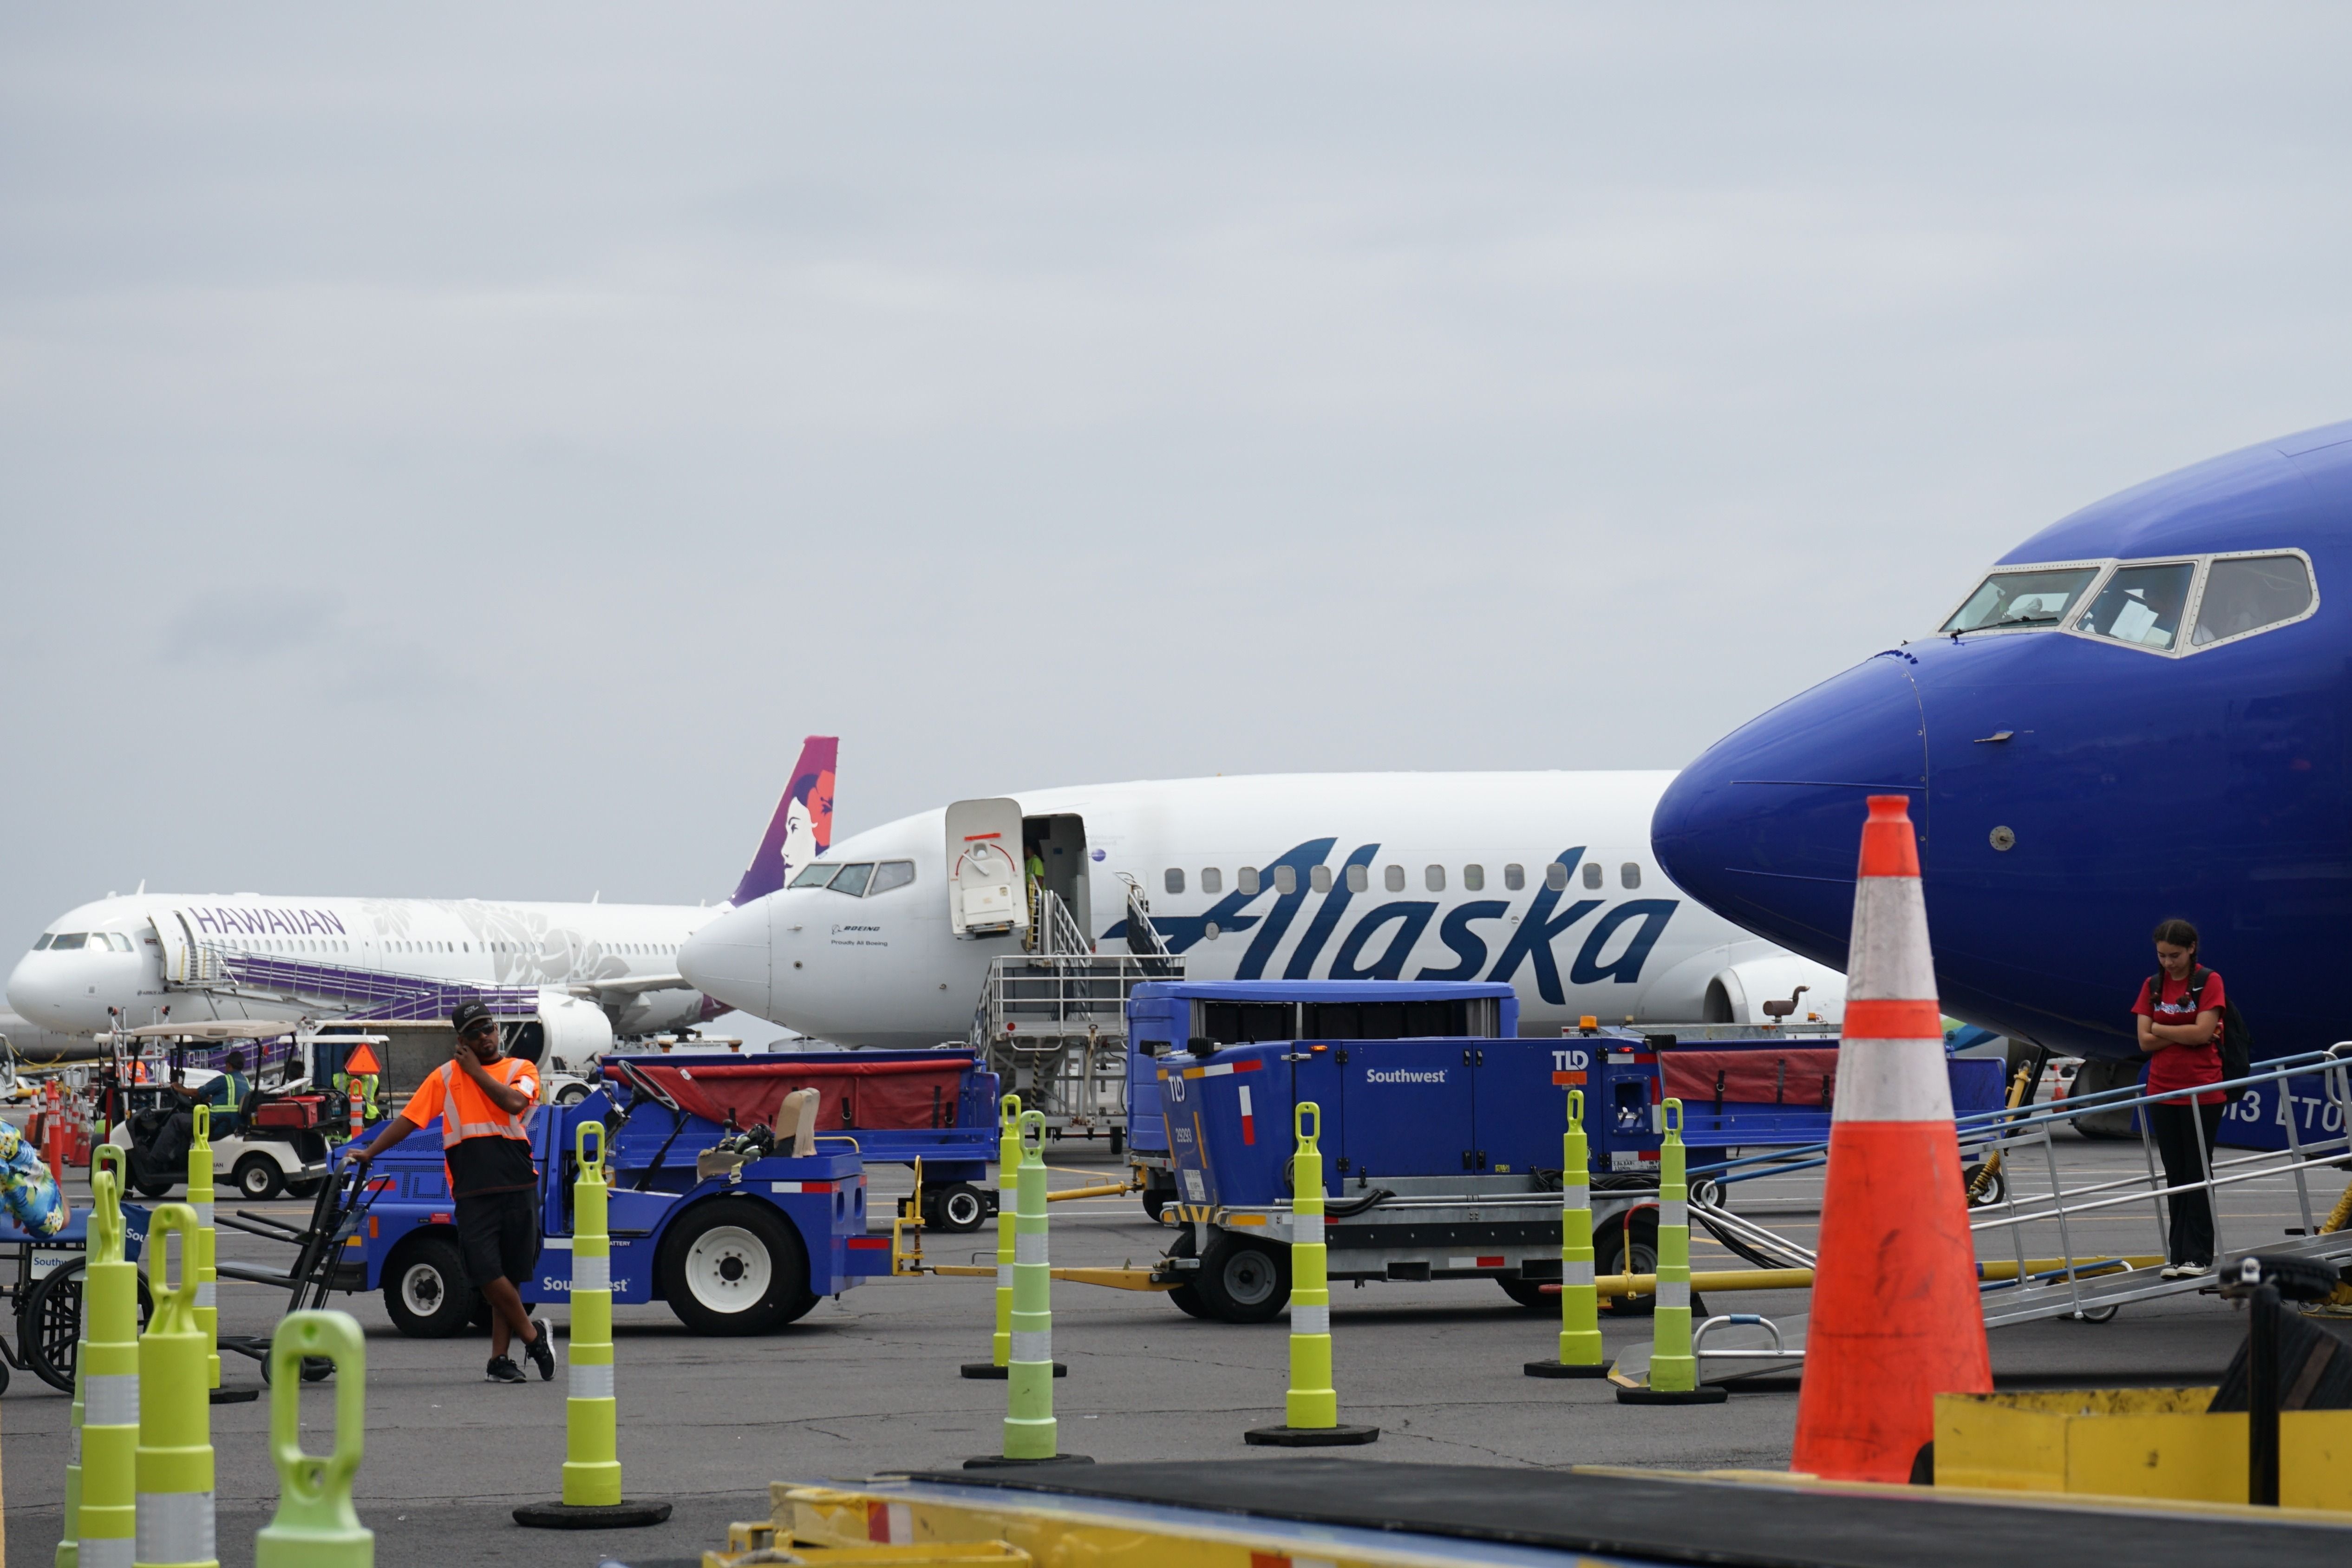 outhwest Airlines, Alaska Airlines, and Hawaiian Airlines aircraft at Kona International Airport.